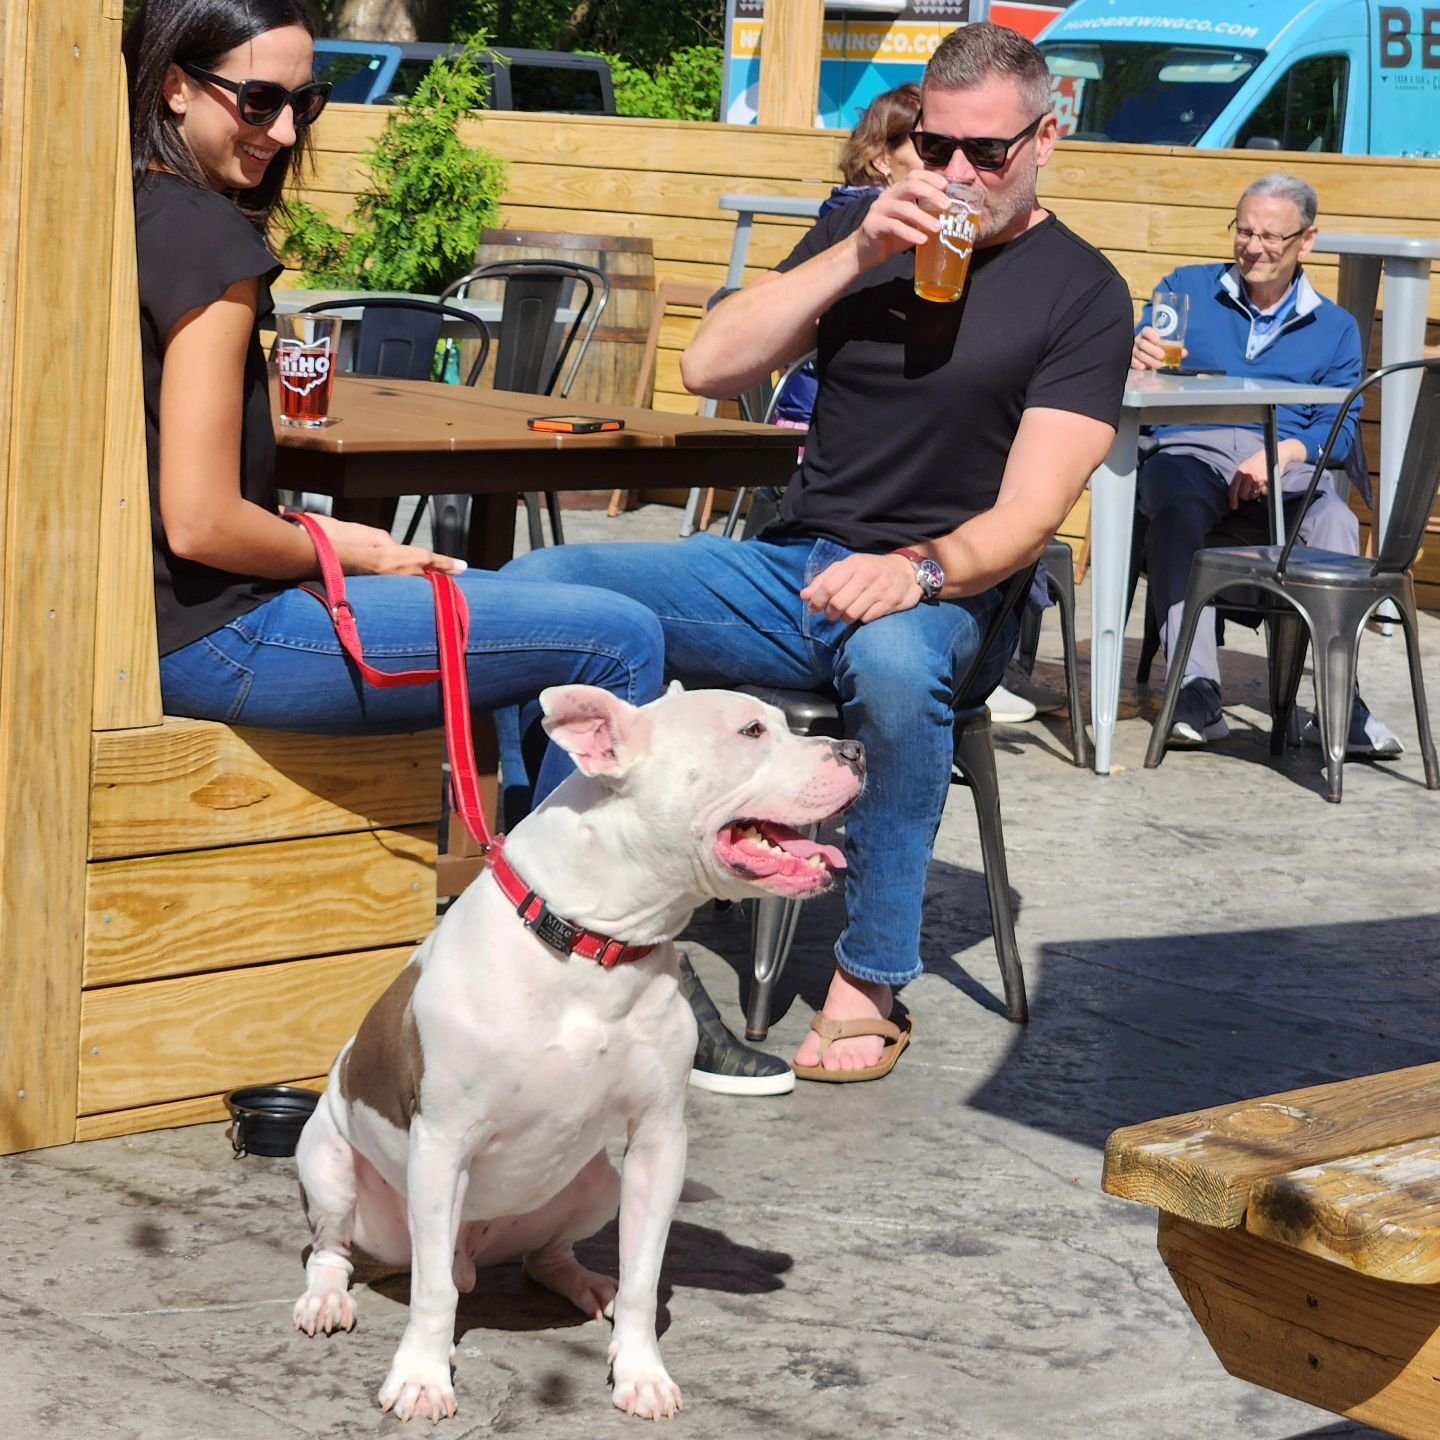 It's a beautiful day to hang with your pup on the patio! See you soon! 🐶🌞

WEEKEND HOURS:
🍺Friday: NOON - 10 PM
🍺Saturday: NOON - 10 PM
🍺Sunday: NOON - 7 PM

#hihobrewingco #sunshine #pupsonthepatio #dogfriendly #cuyahogafalls #ohiocraftbeer #oh